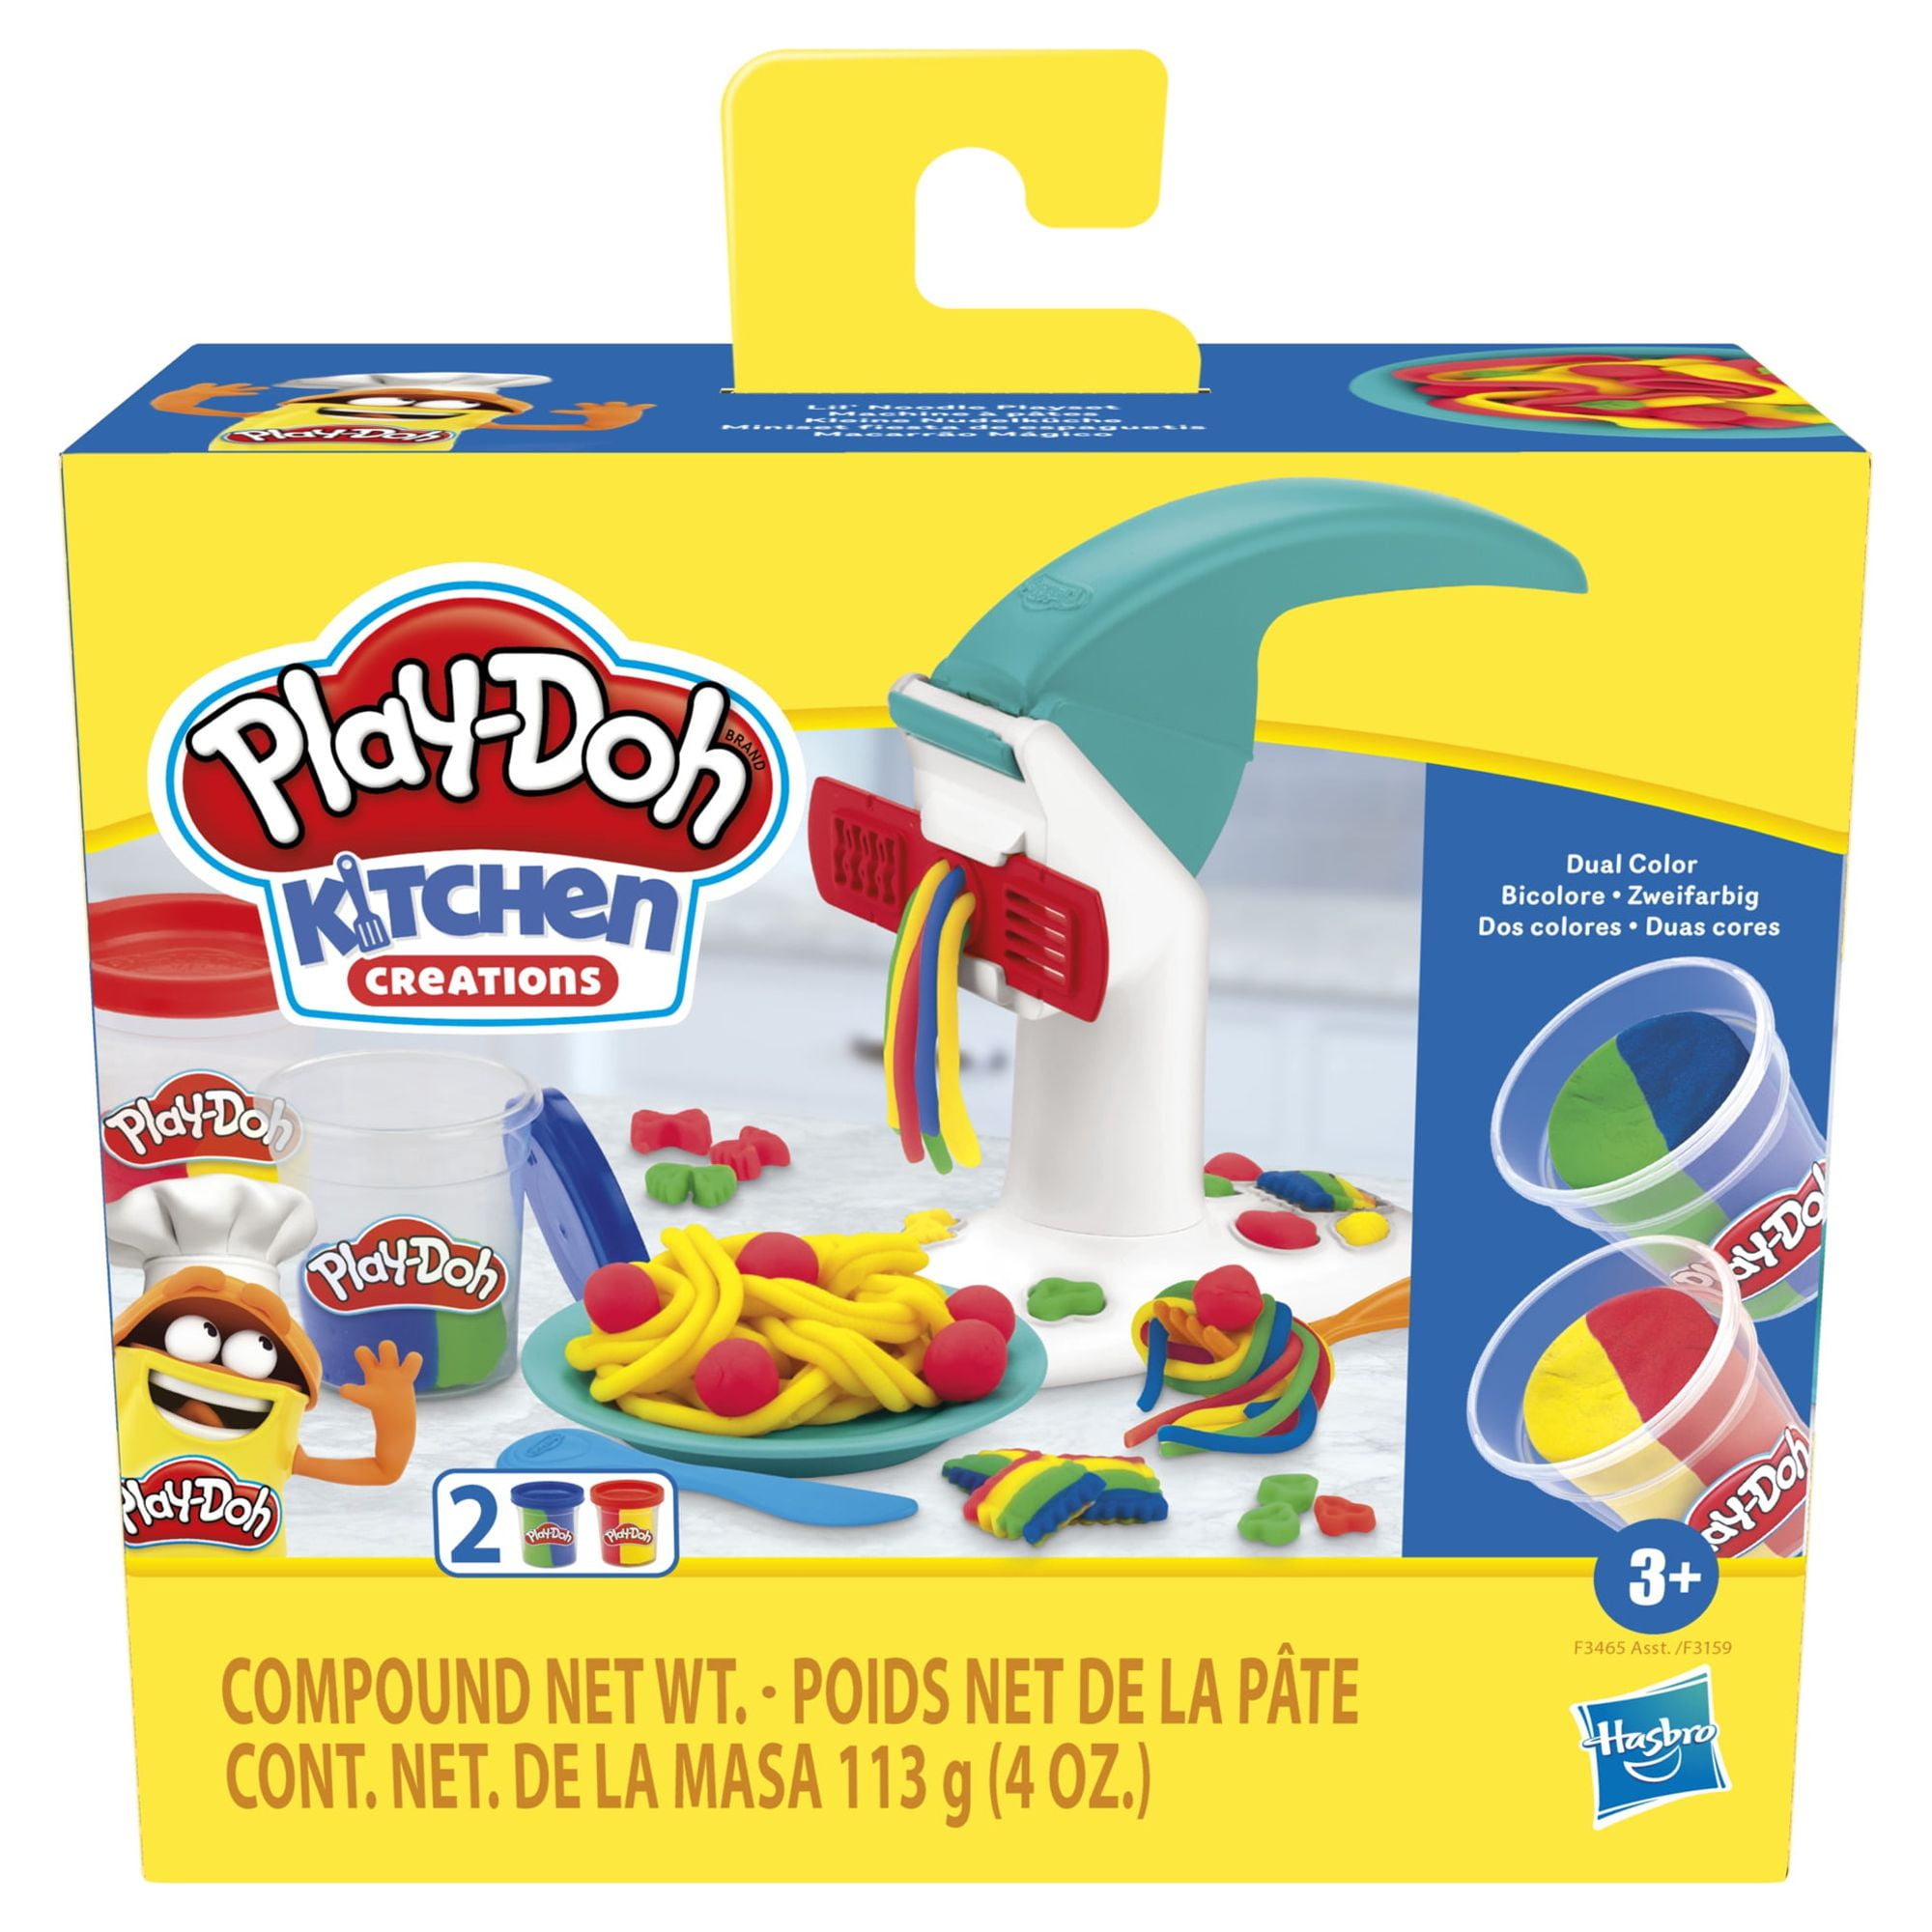 Play-Doh Kitchen Creations Lil’ Noodle Play Dough Set - 4 Color (2 Piece), Only At Walmart $16.38